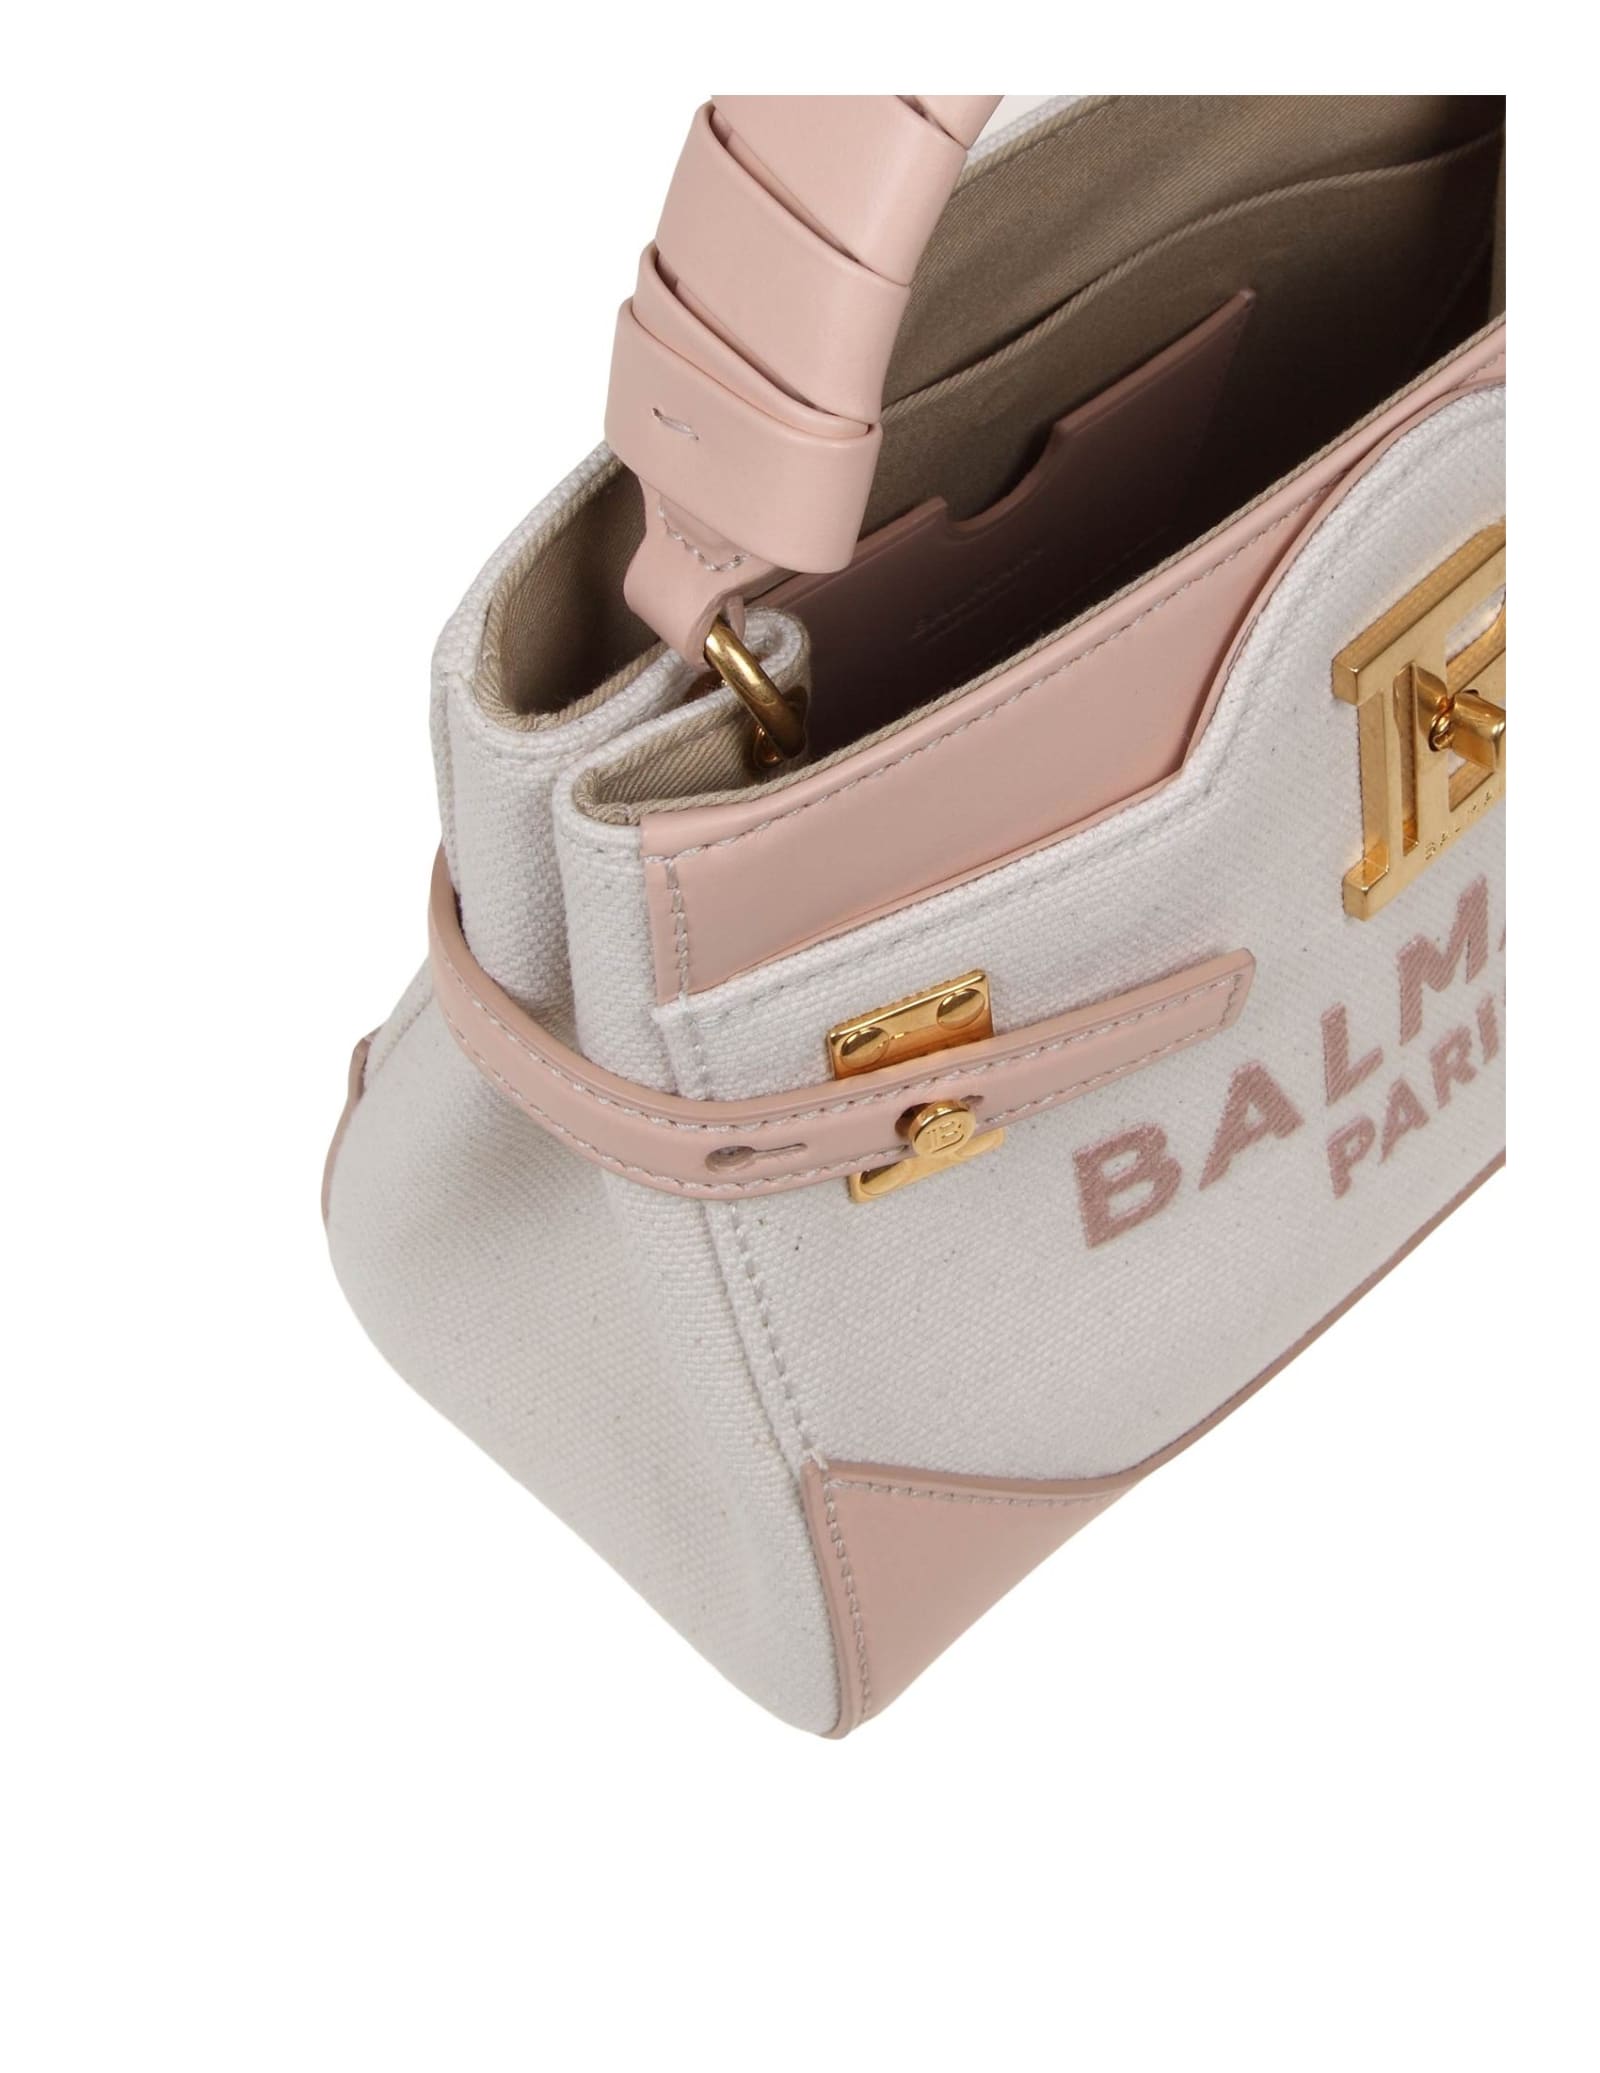 Shop Balmain B-buzz 22 Bag In Canvas And Leather Nude Pink In Creme/nude